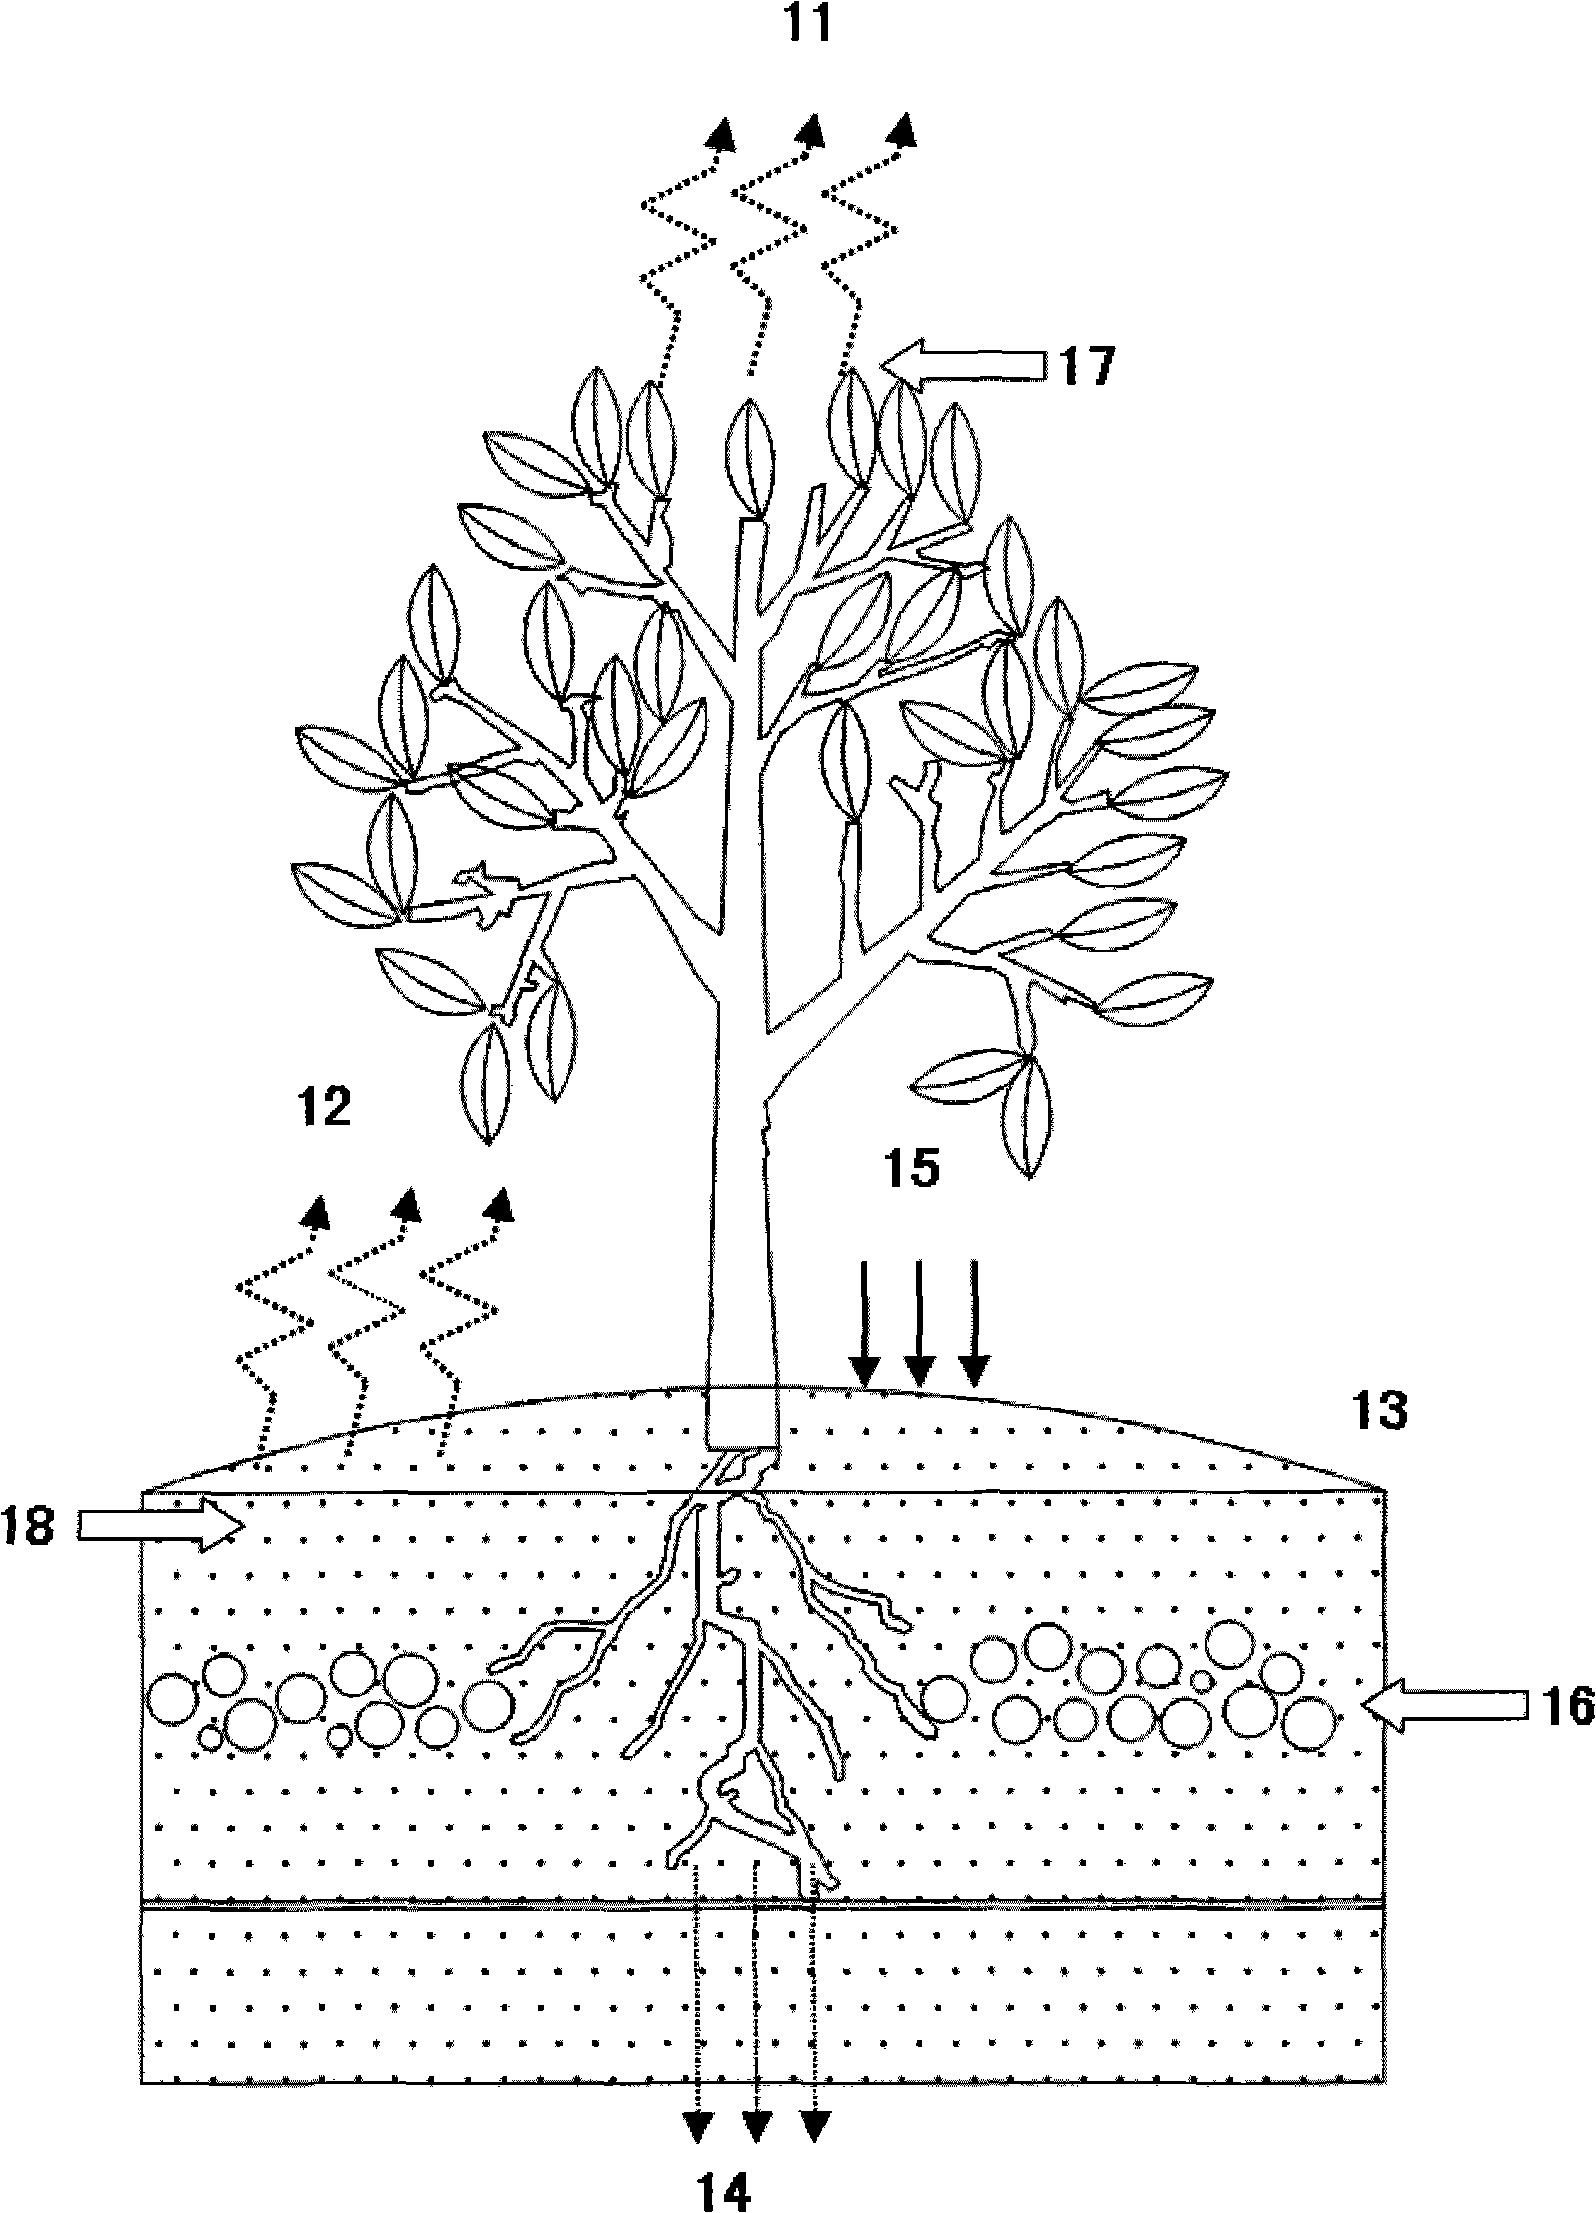 Overall water-saving regulating and controlling method for fruit tree and vegetable